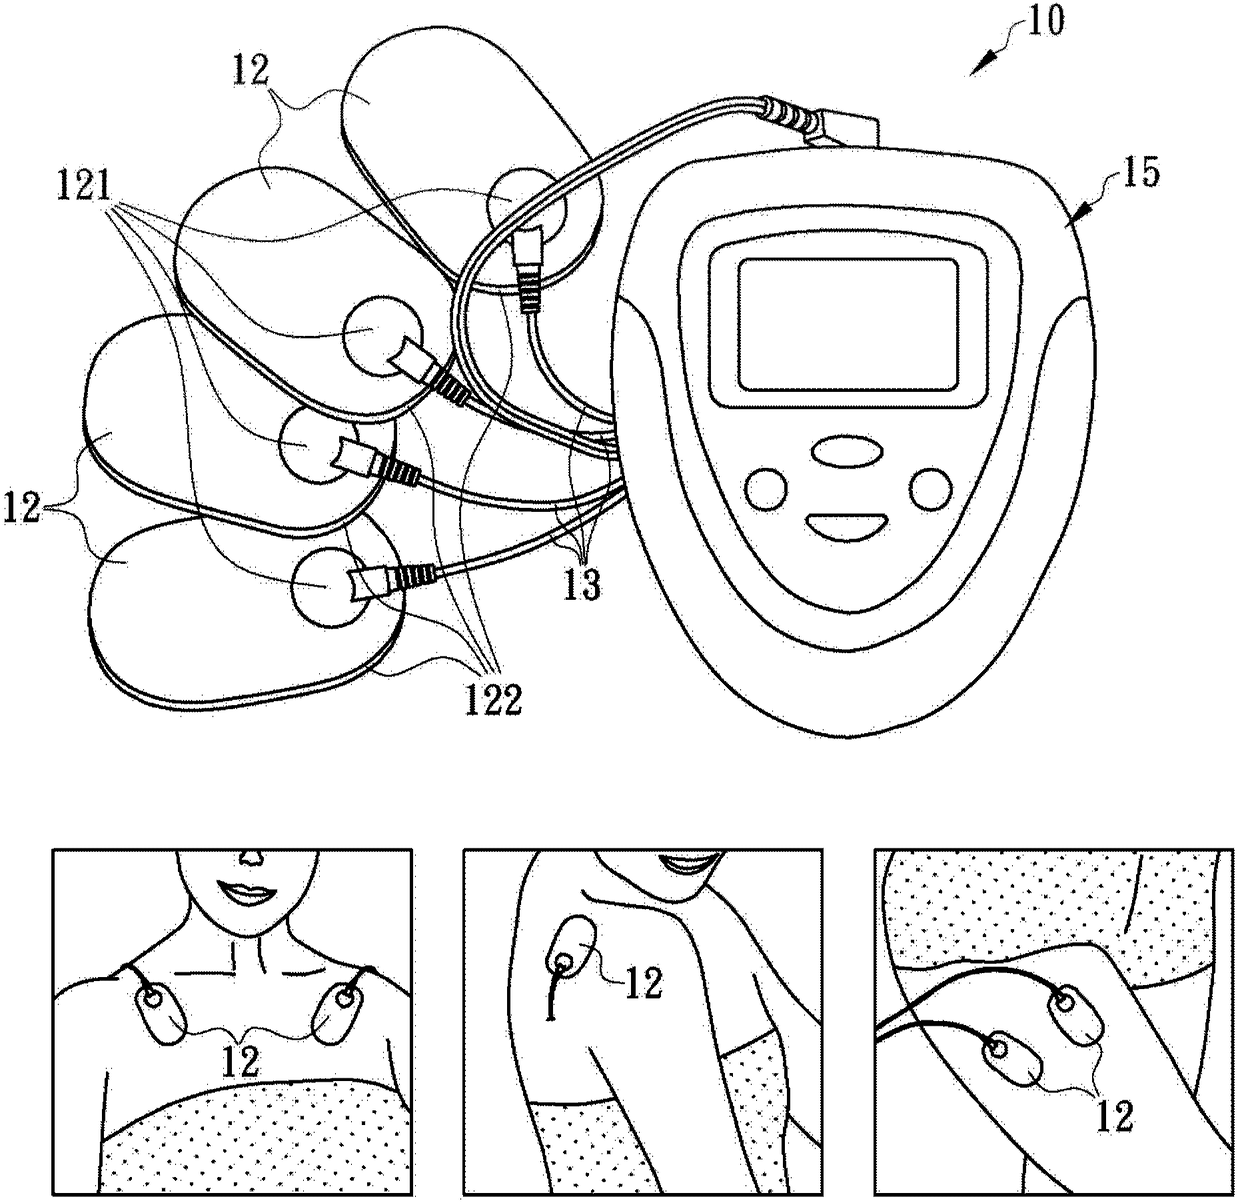 Device for performing therapeutic massage on head, neck and shoulders